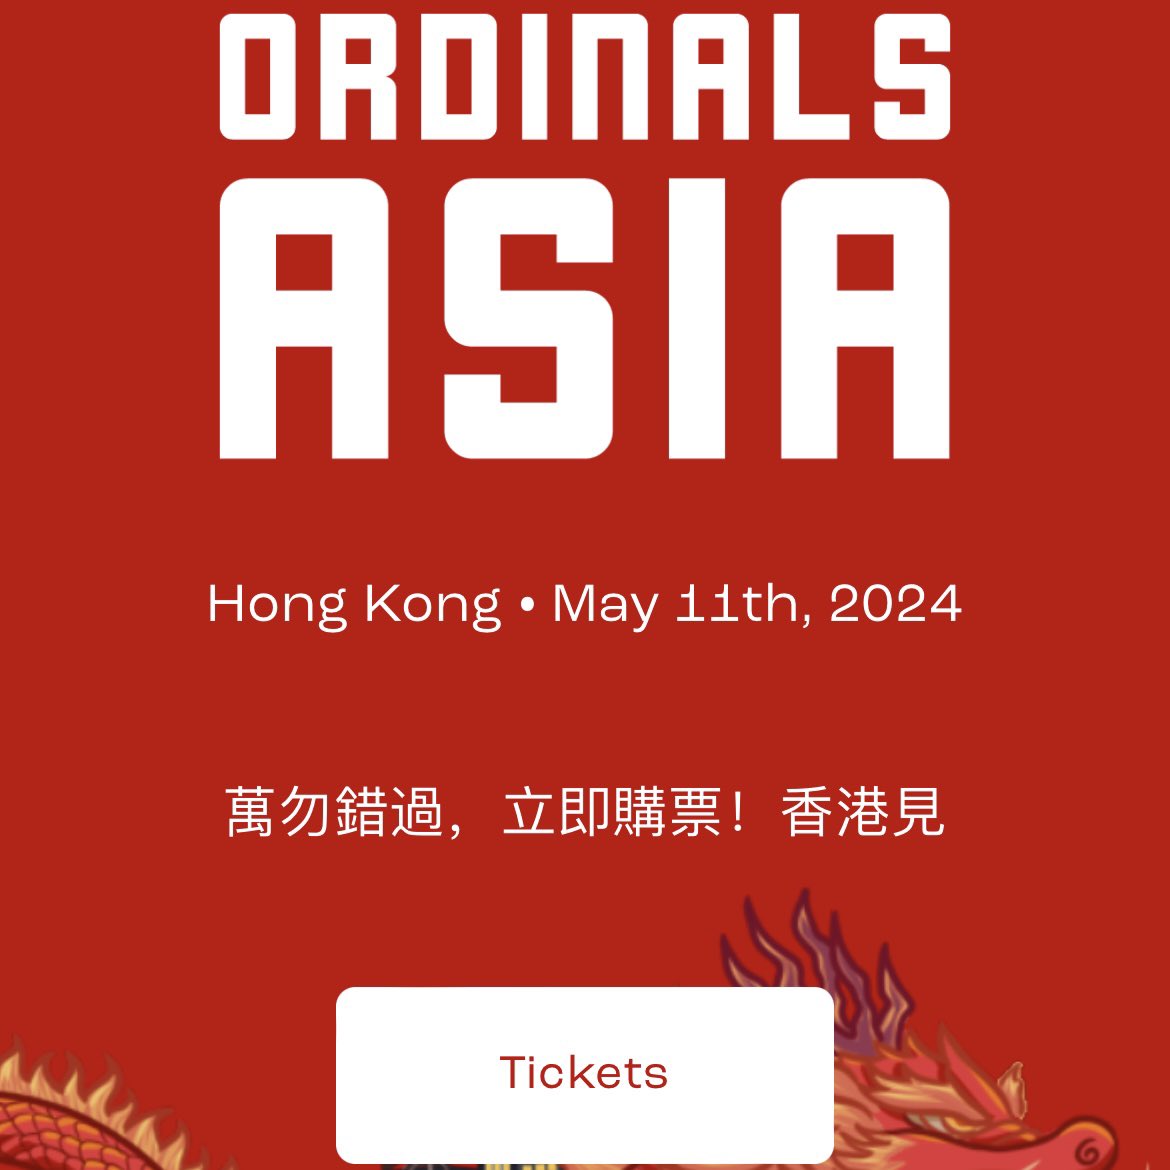 Bought my ticket to @Ordinals_Asia with BTC! 🫡 Super excited to be there and meet in person! @nonfungible_jan @XverseApp @TO @huuep @ElizabethOls0n @rodarmor @Jiurn @LeonidasNFT @raphjaph @robin_liquidium @proofofmud Who else is coming? 👀